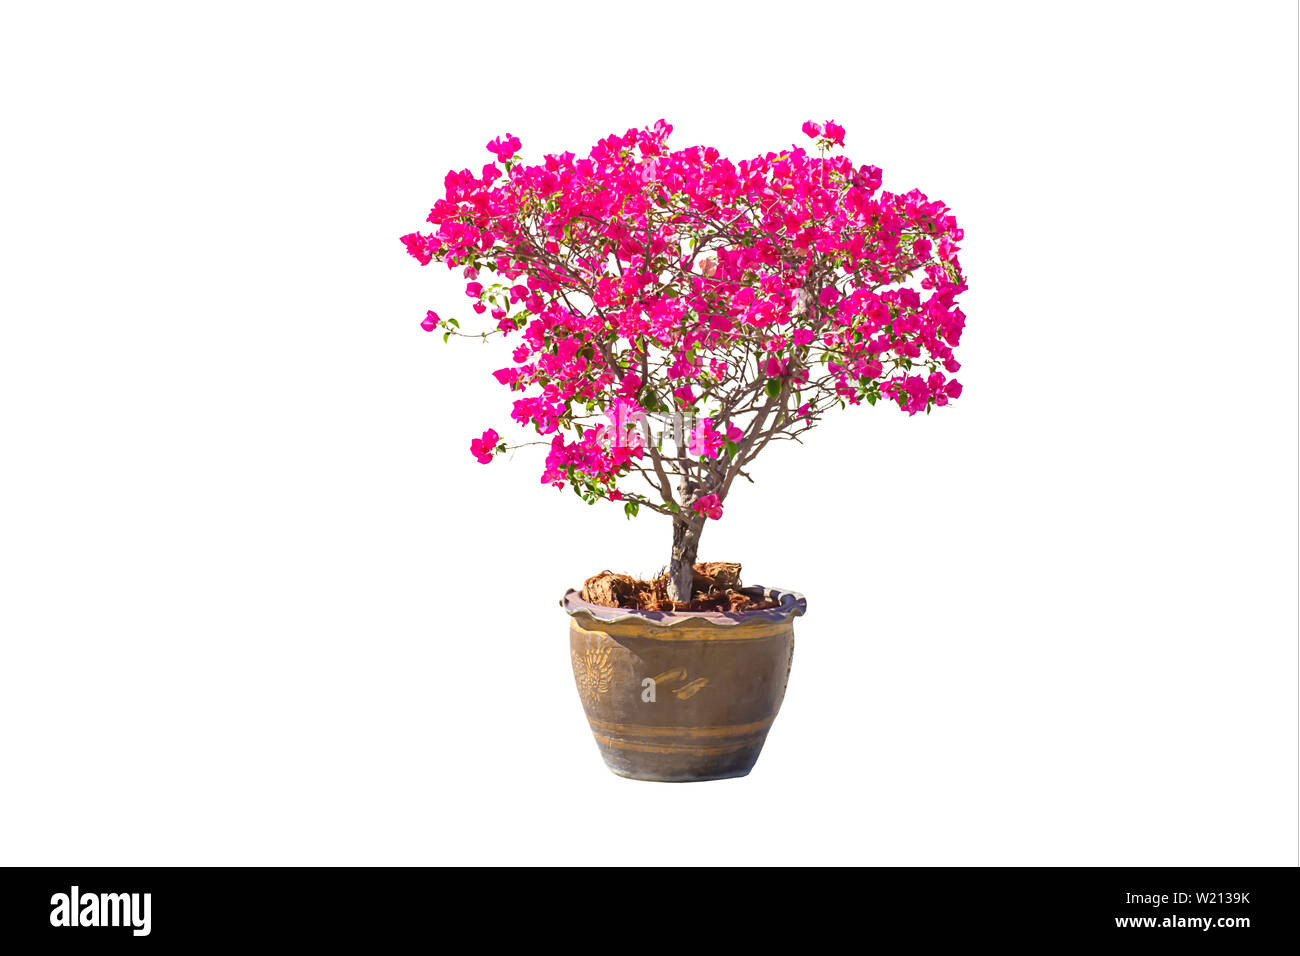 The pink Bougainvillea flowers are in a plant pot made of clay on a white background with clipping path. Stock Photo